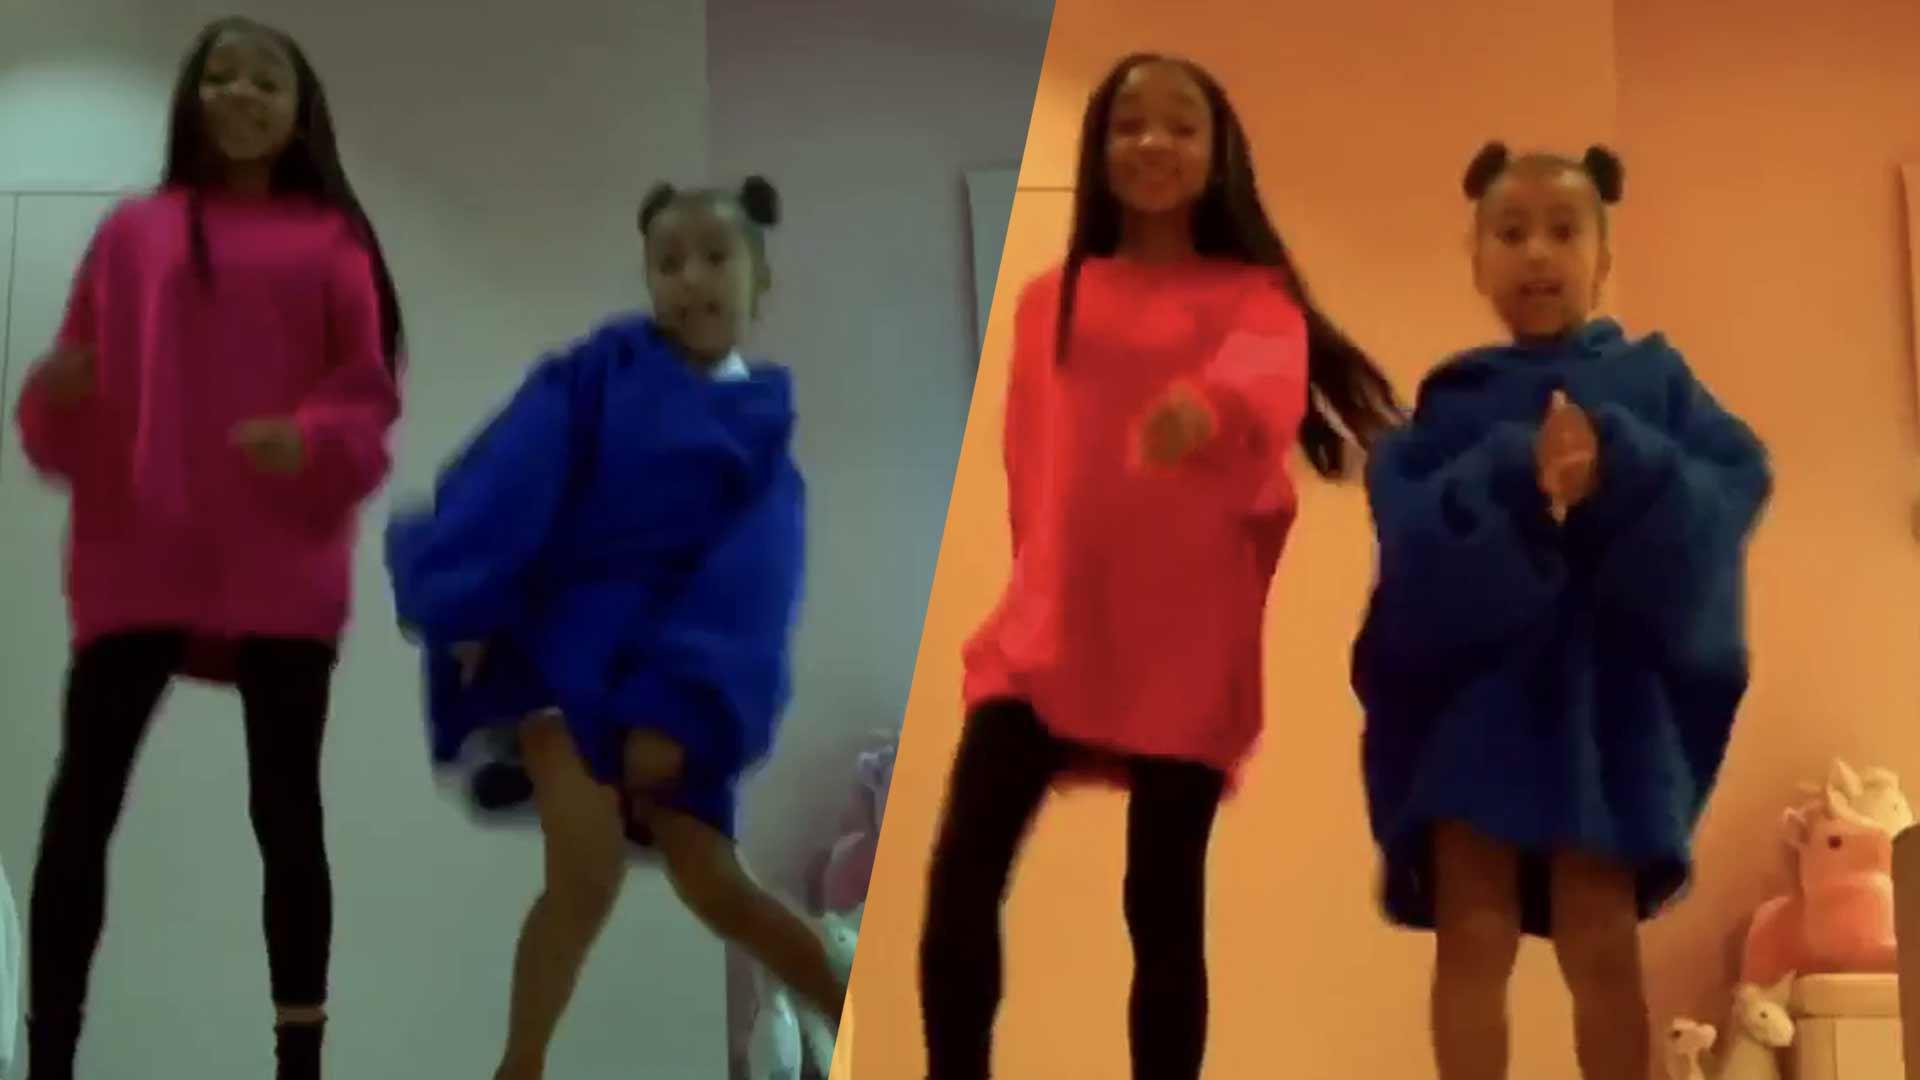 North West Stars In Awesome TikTok Video With Kid Rapper That Girl Lay Lay, Kim Kardashian Loves It